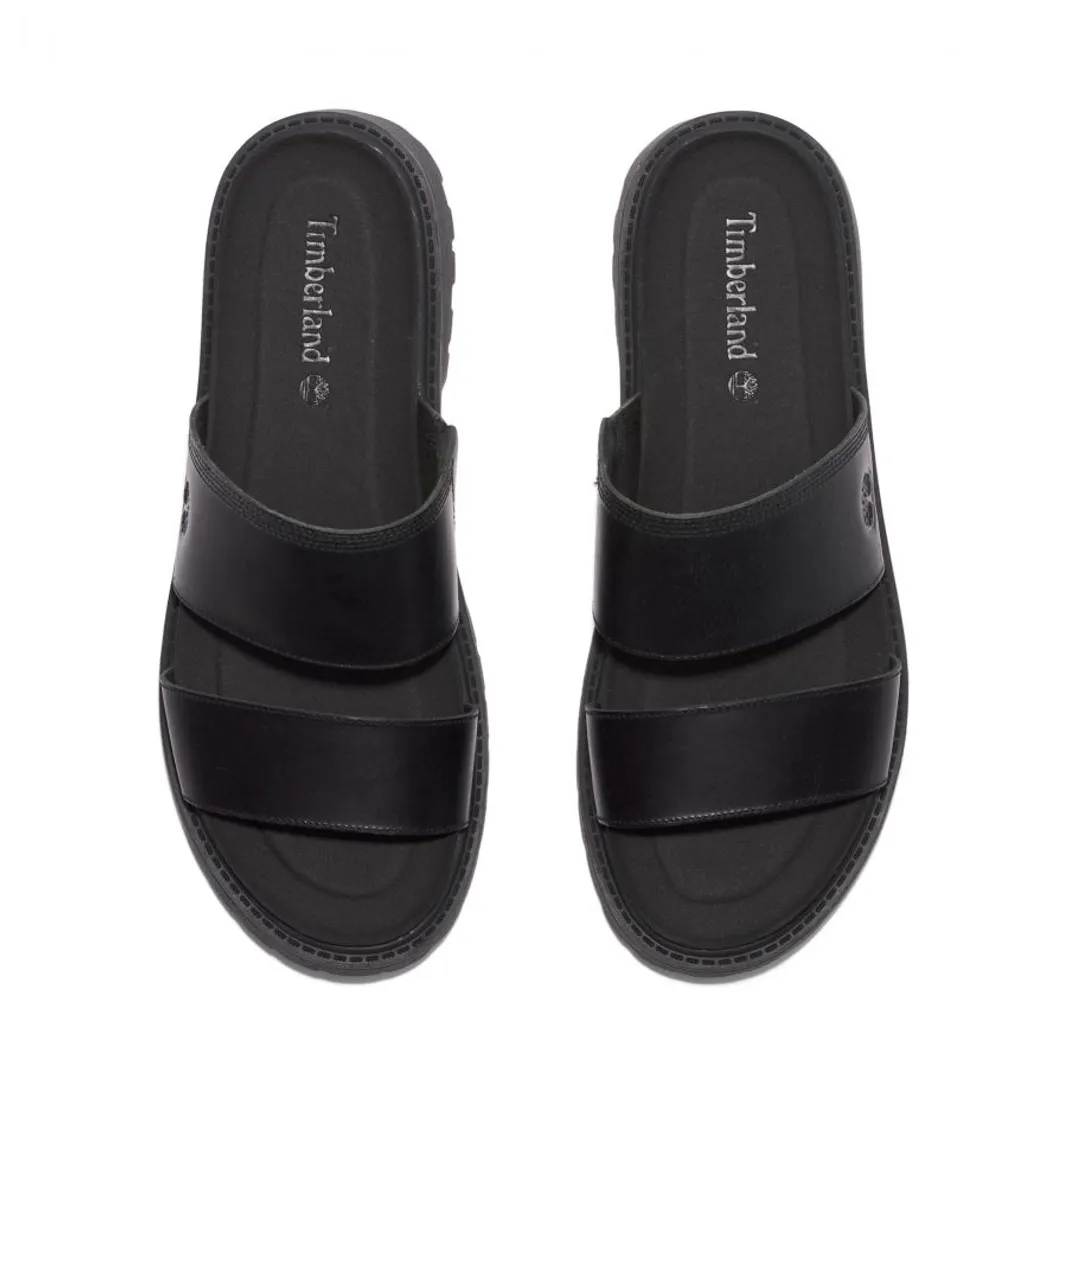 Timberland Clairemont Way Womens Leather Sliders - Black